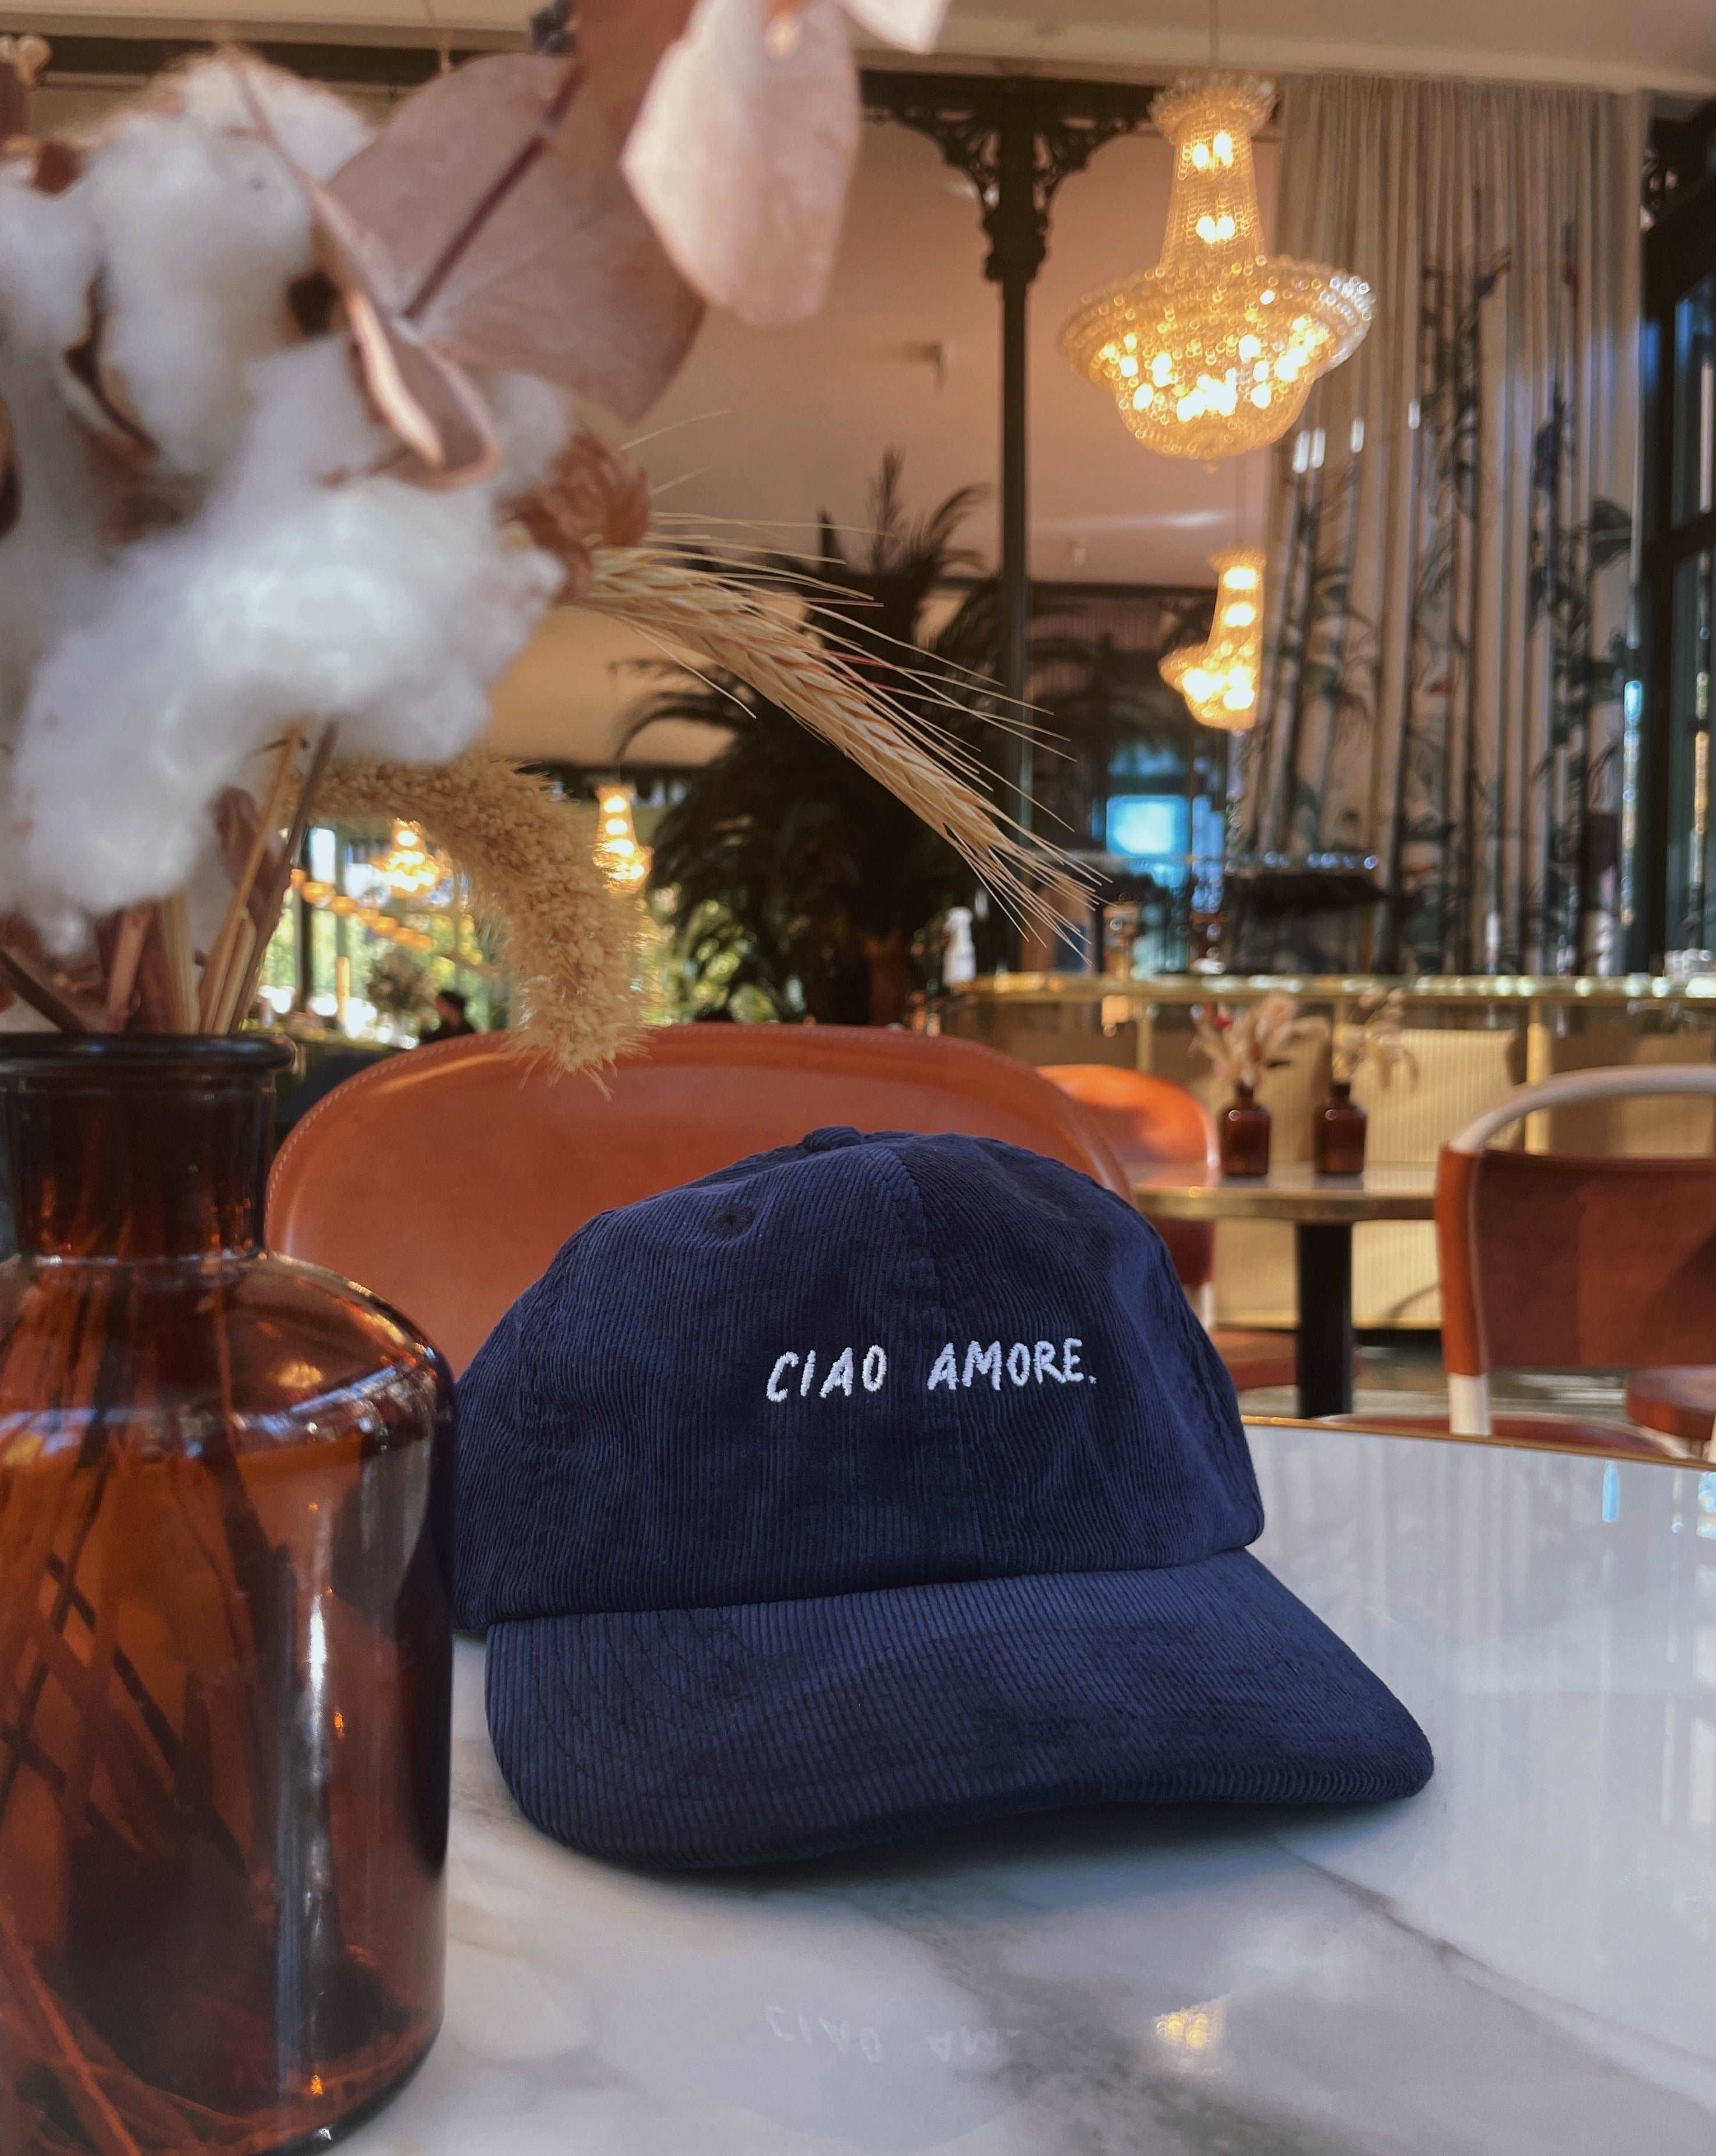 Ciao Amore. - Corduroy Cap - The Refined Spirit